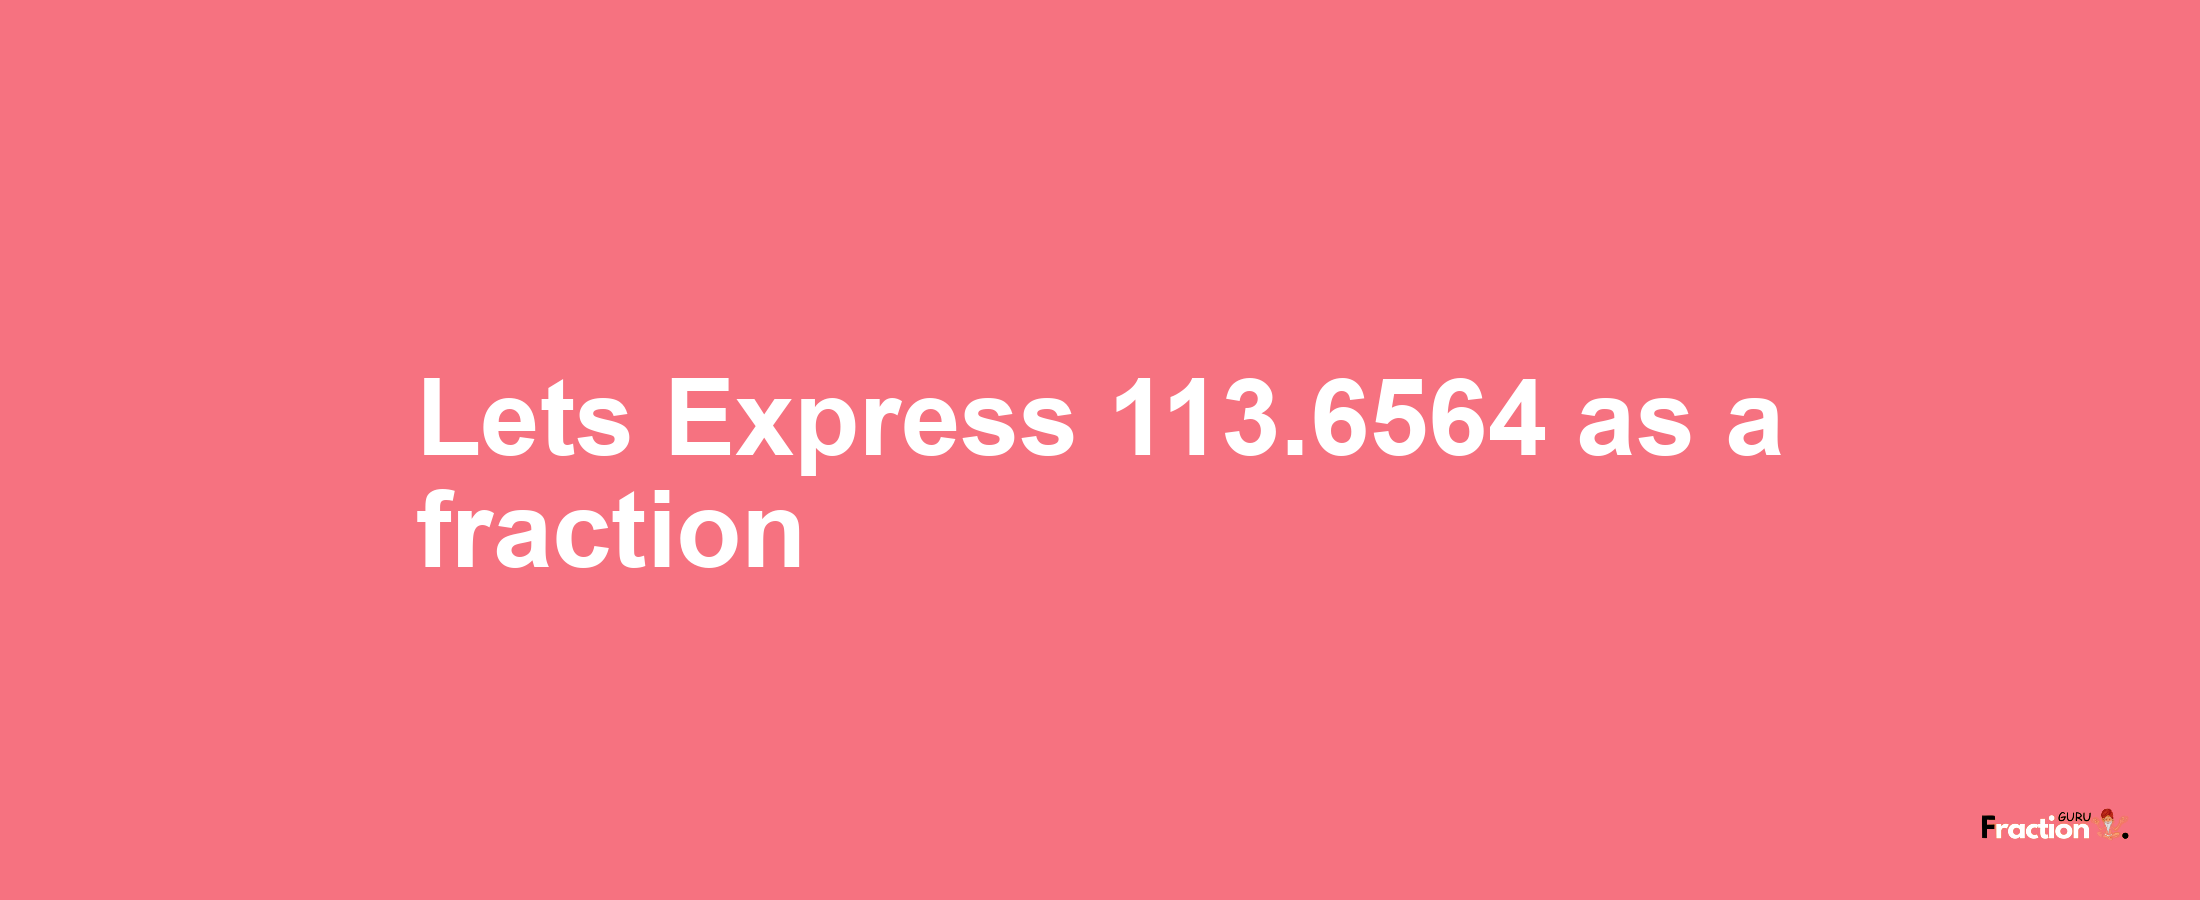 Lets Express 113.6564 as afraction